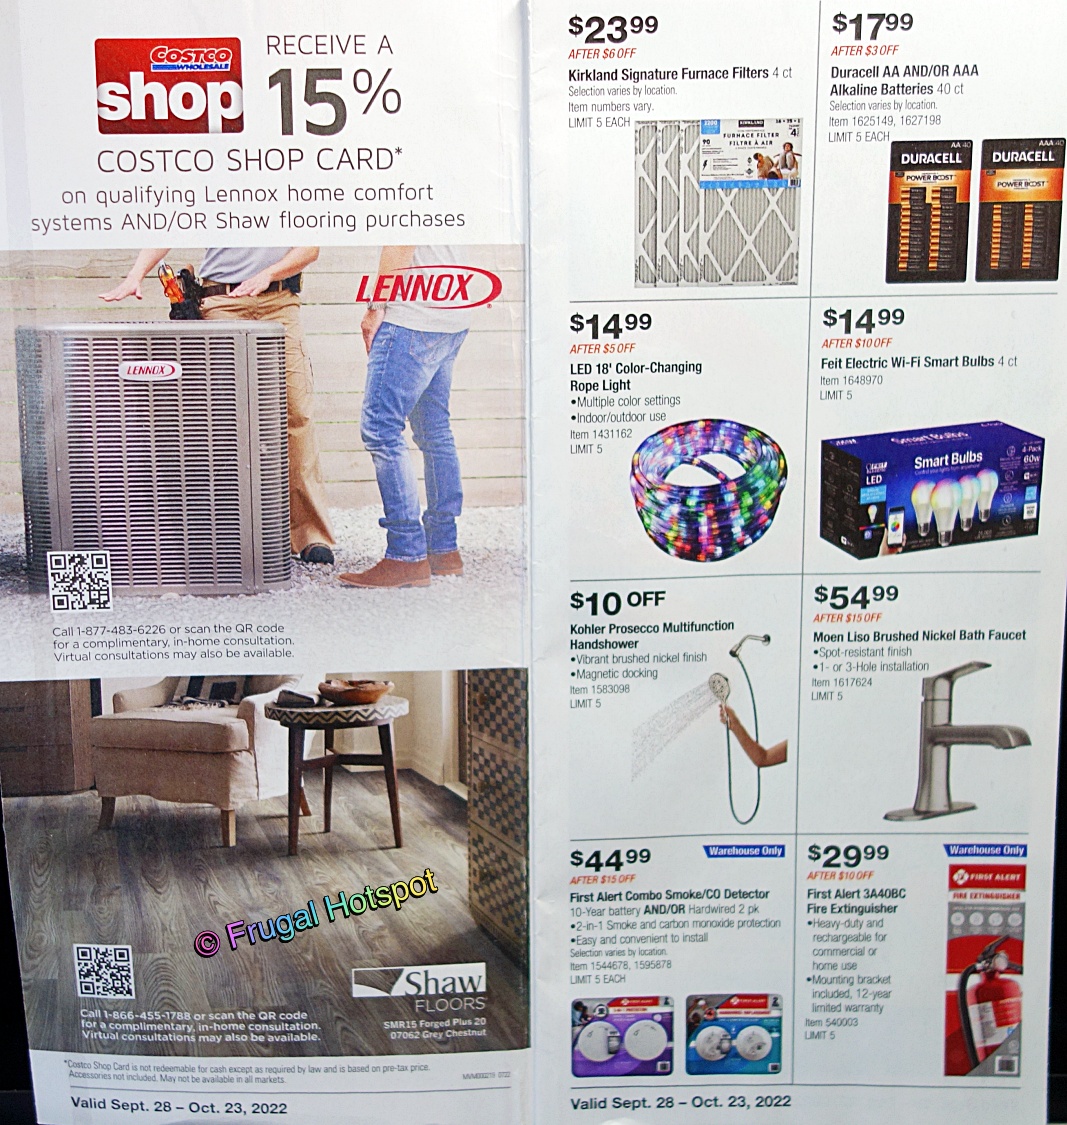 Costco Coupon Book OCTOBER 2022 | Pages 2 and 3